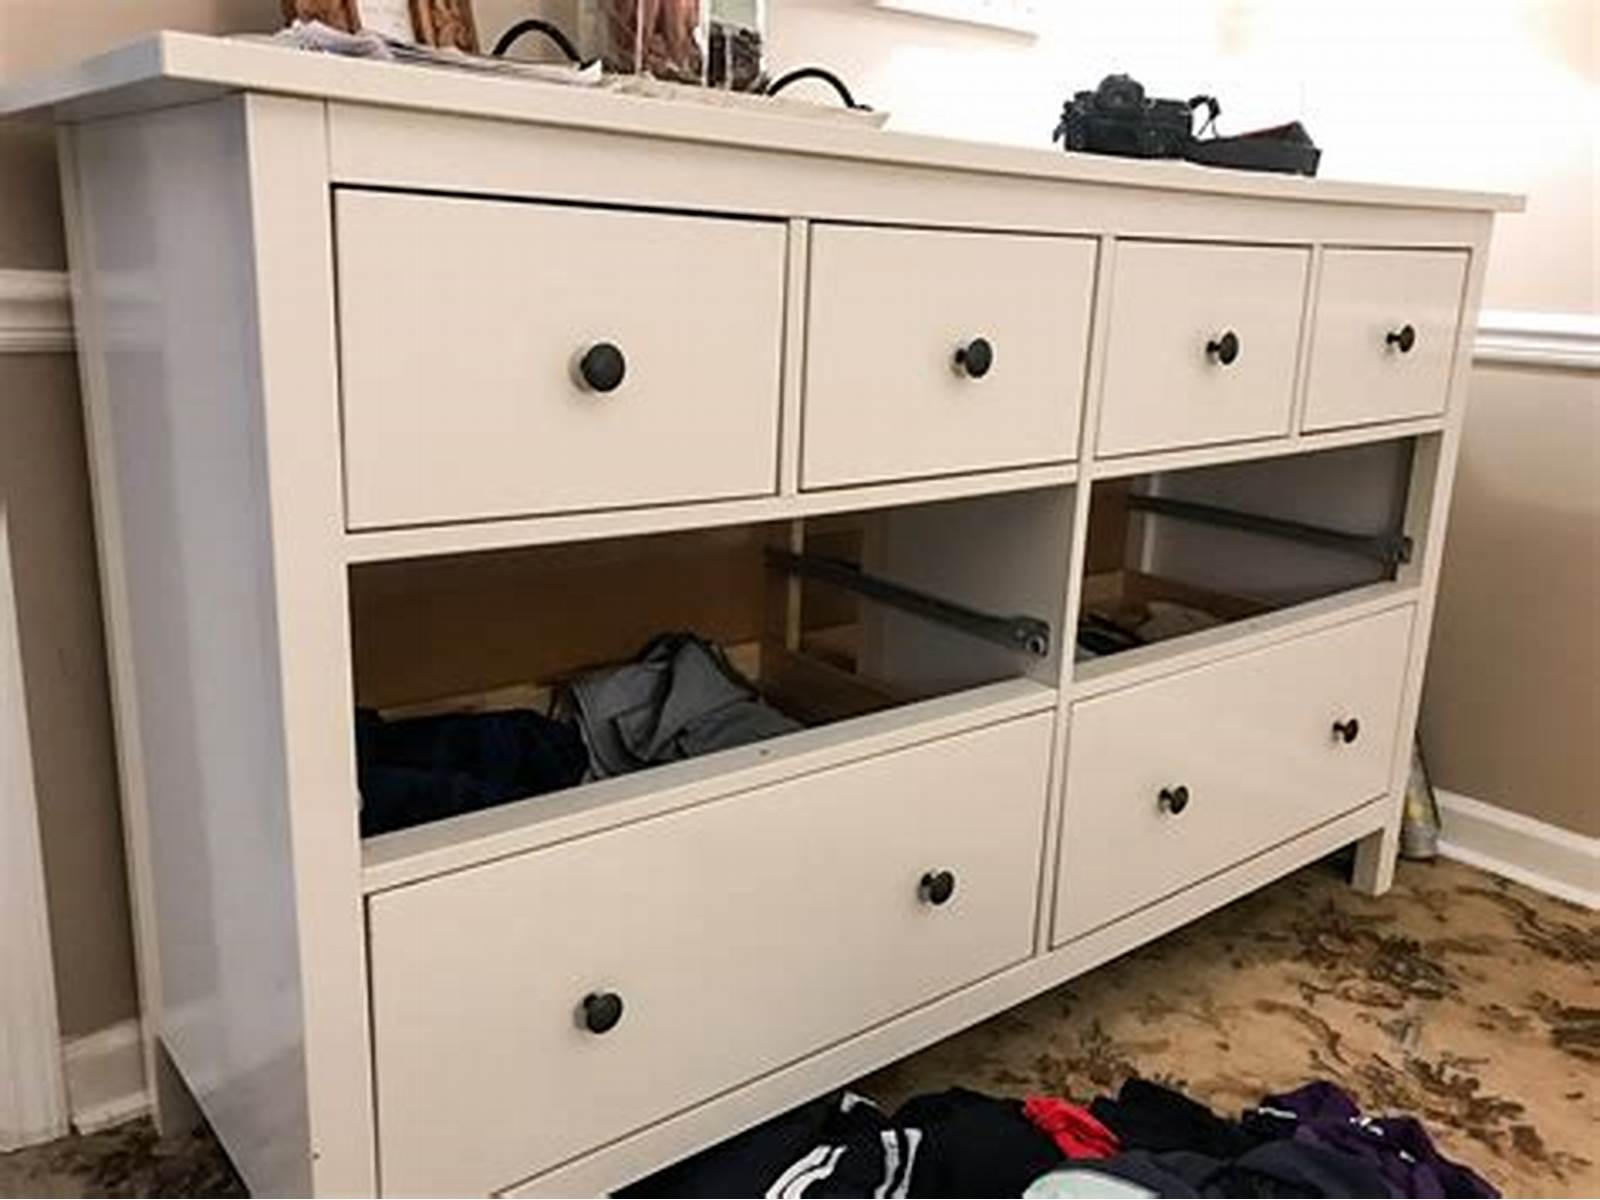 Tools Needed for Fixing Hemnes Drawers